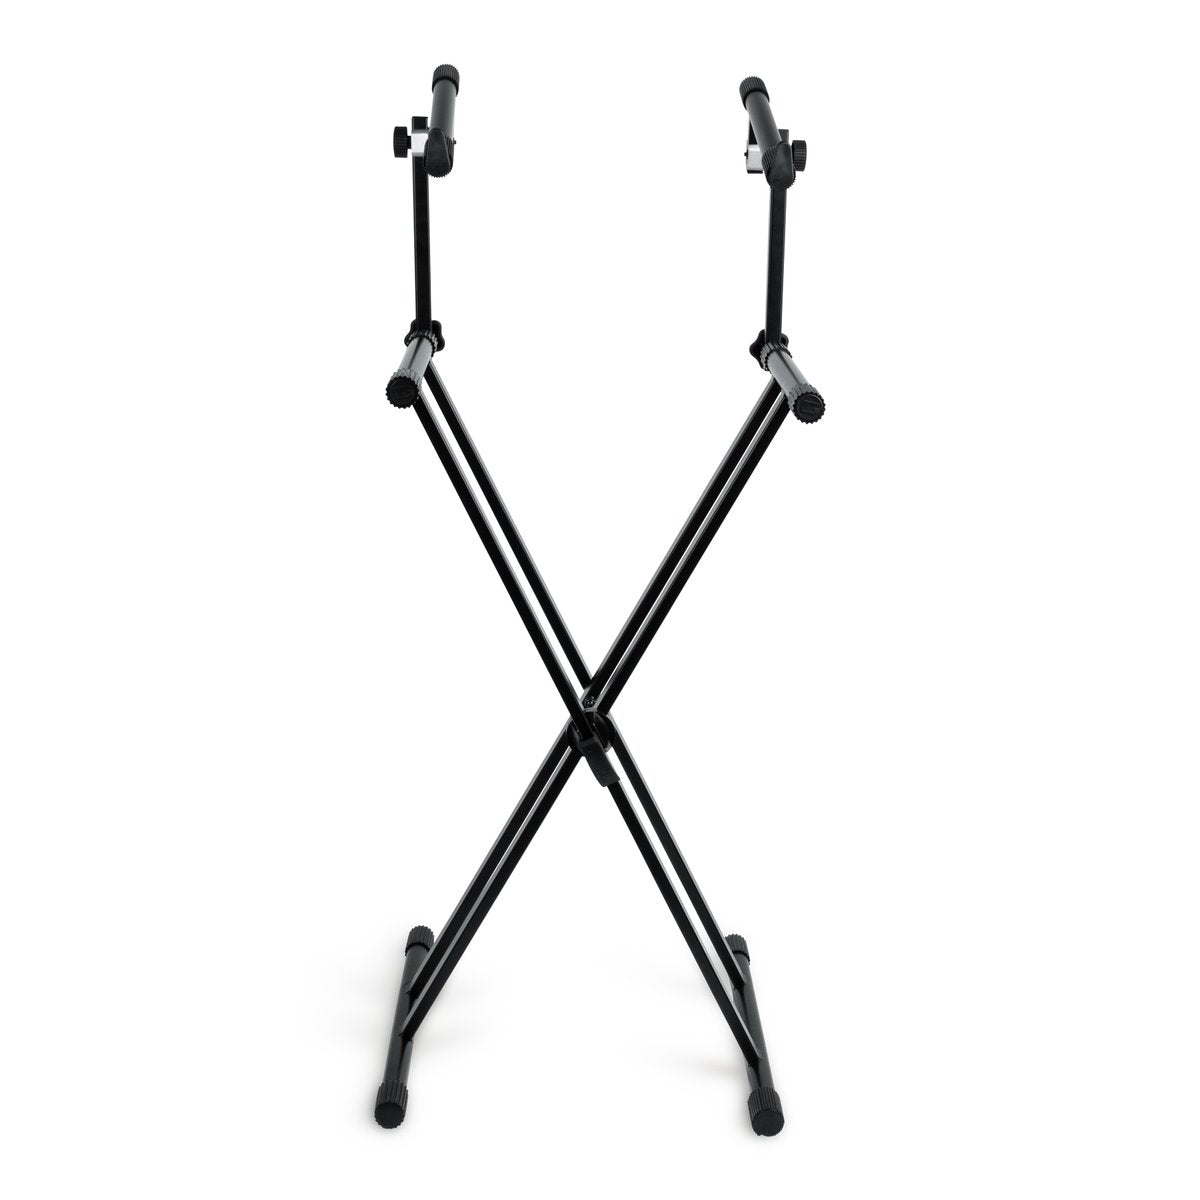 Frameworks heavy duty 2 Tier "X" style keyboard stand with rubberized leveling foot